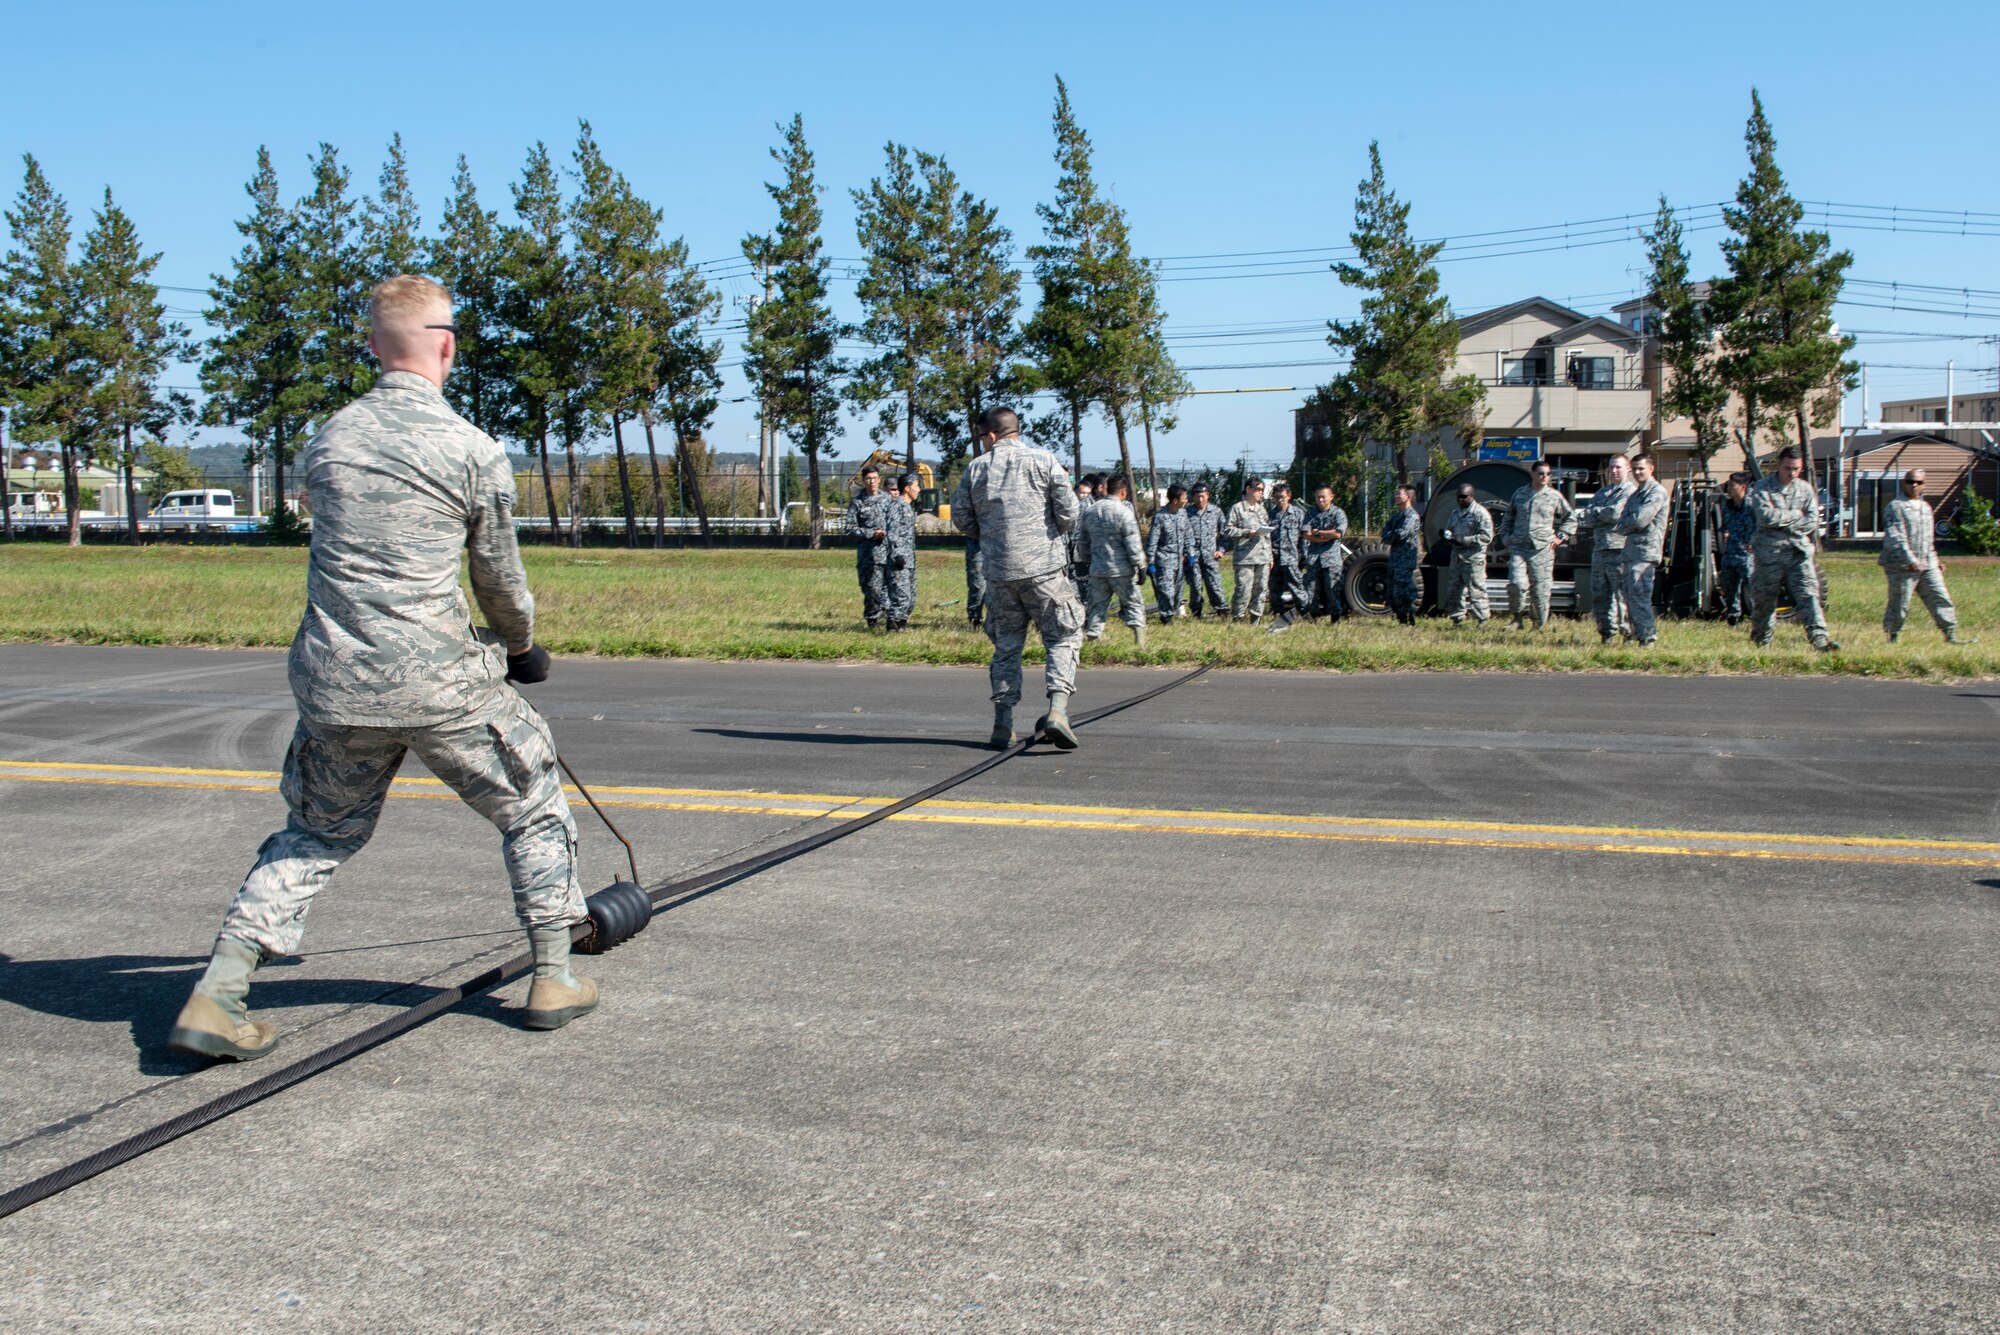 Airmen from the 374th Civil Engineer Squadron work to properly spread out the donuts on the line of a Mobile Aircraft Arresting System (MAAS) at a bilateral training event at Yokota Air Base, Japan, Oct. 25, 2018.